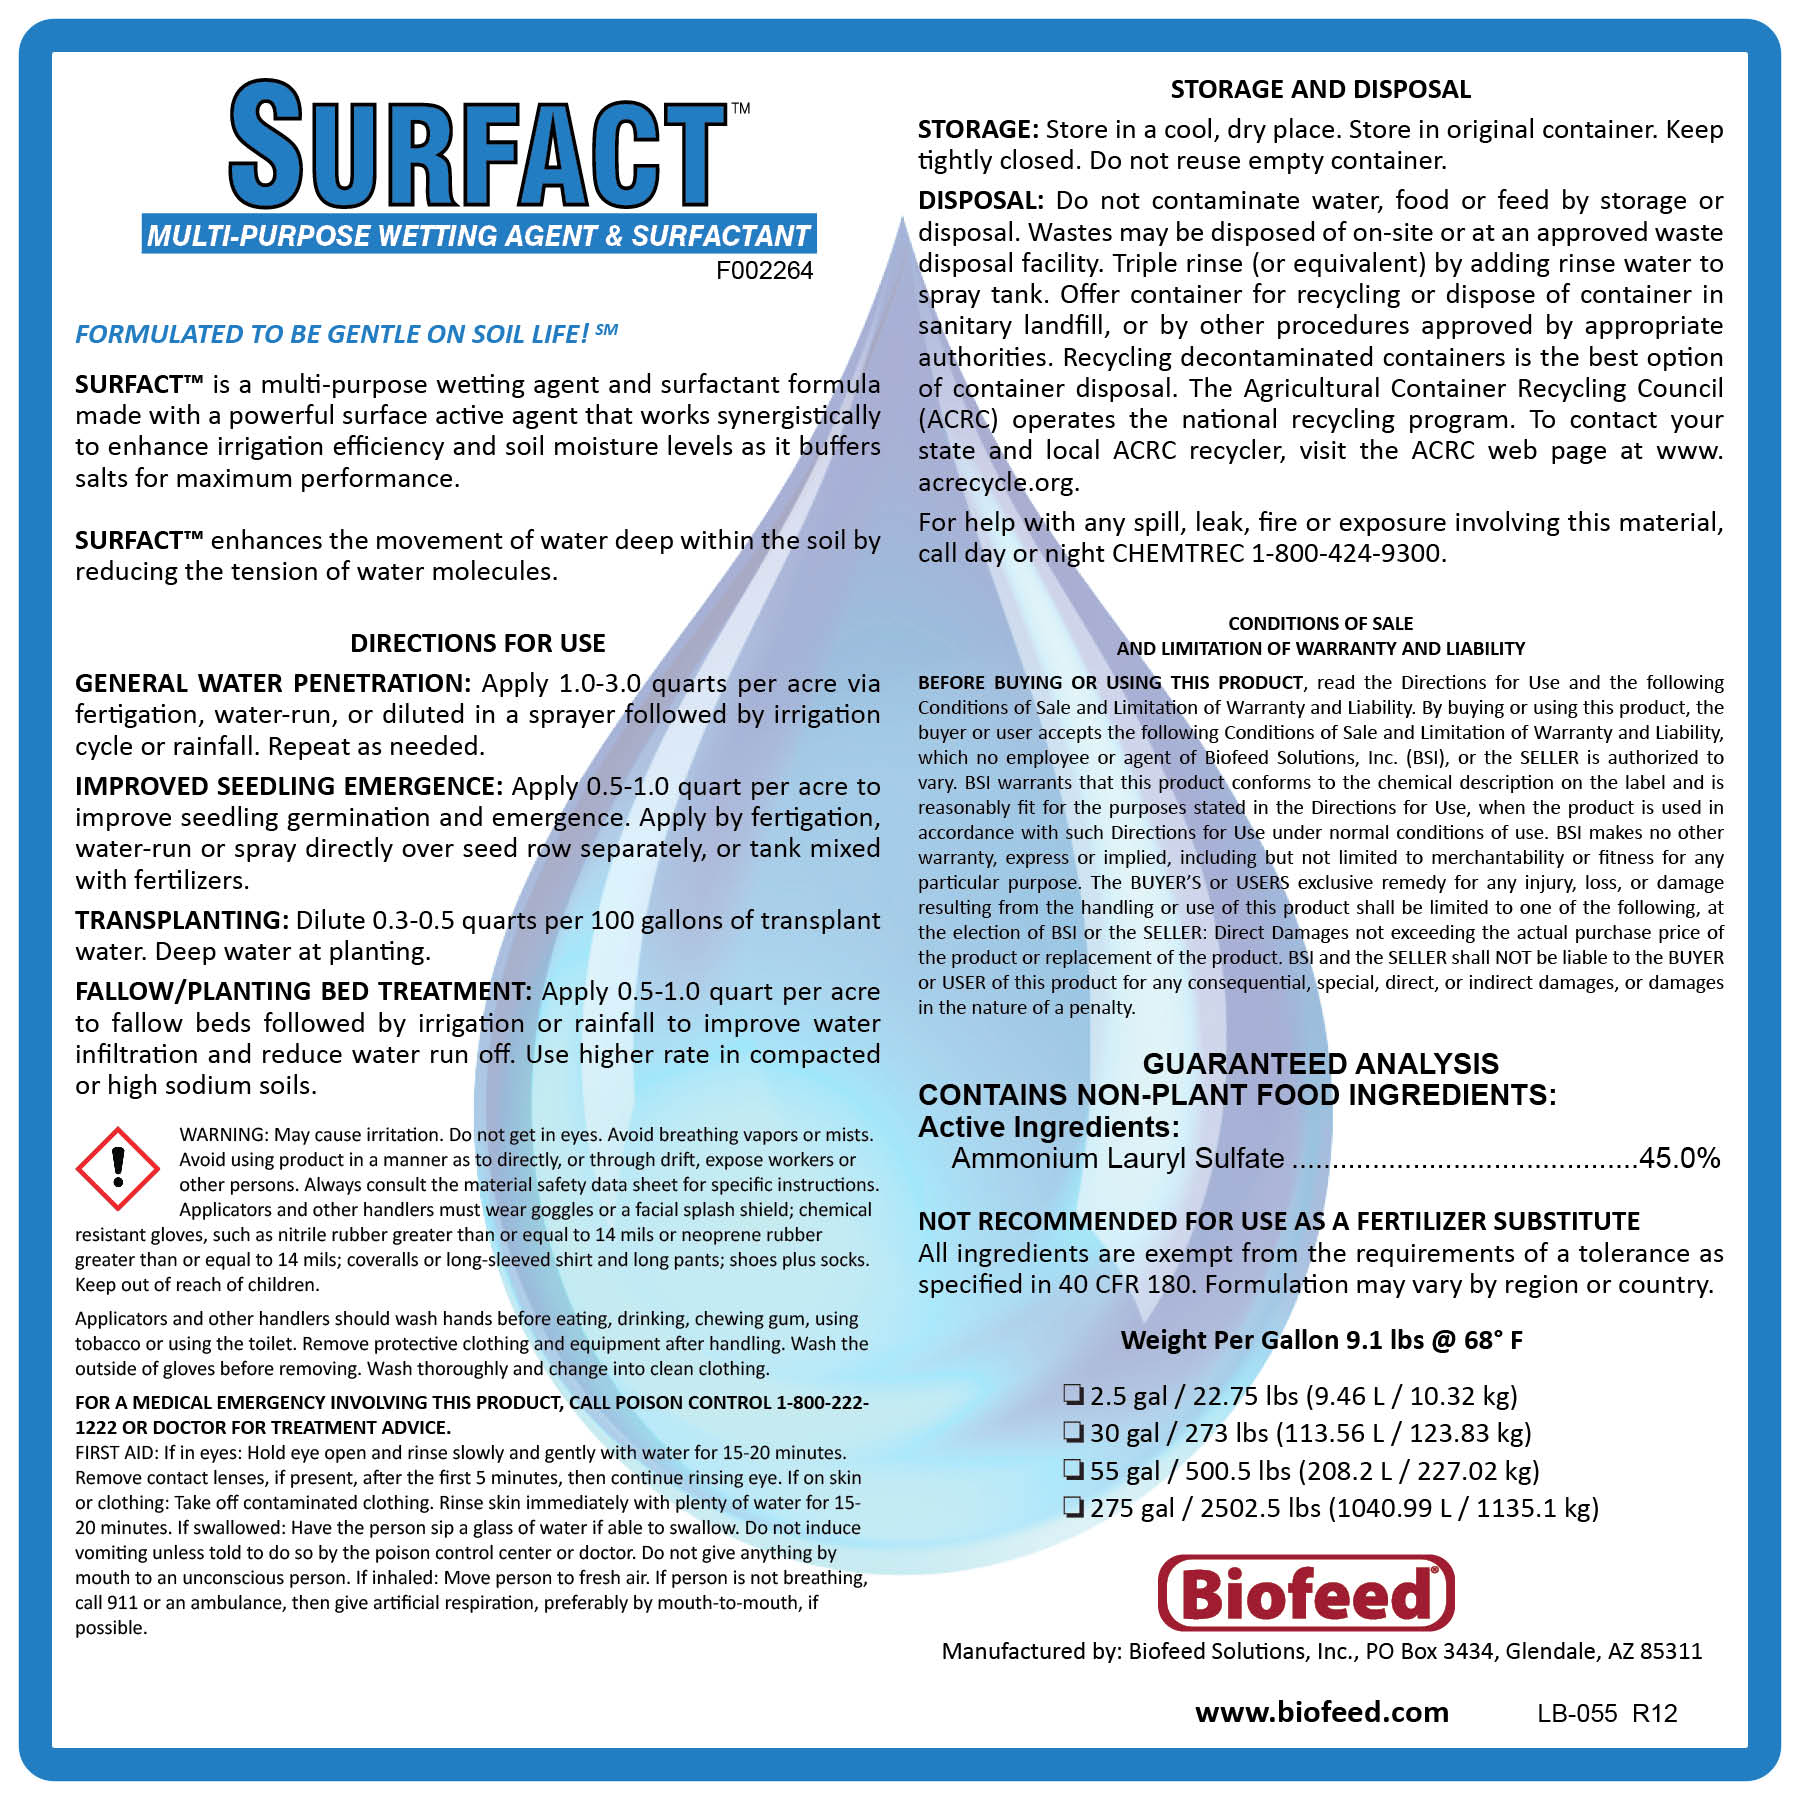 SURFACT™ Multi-Purpose Wetting Agent and Surfactant